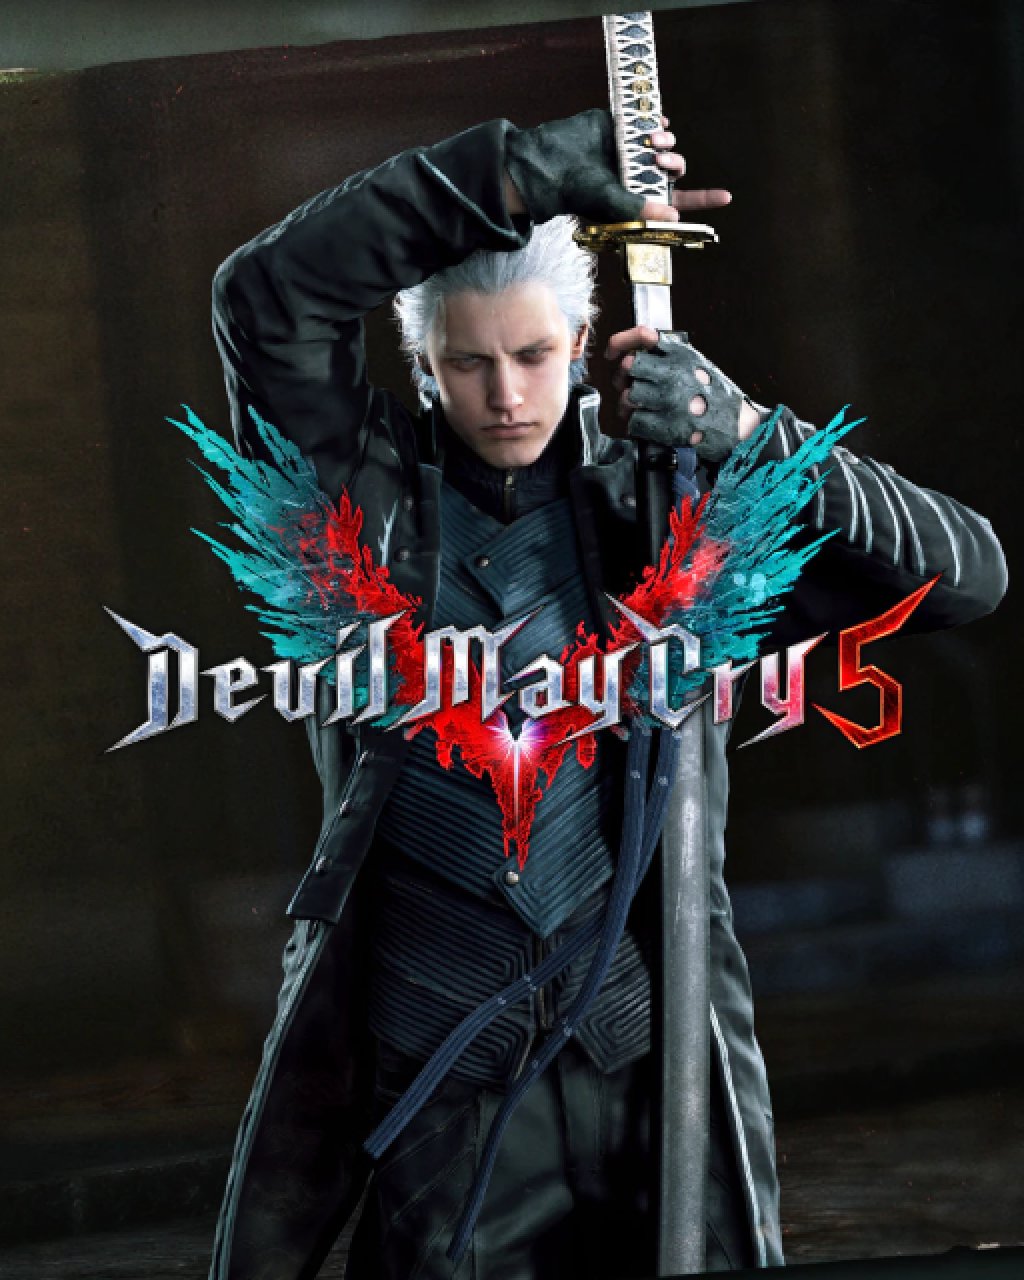 ESD Devil May Cry 5 Playable Character Vergil